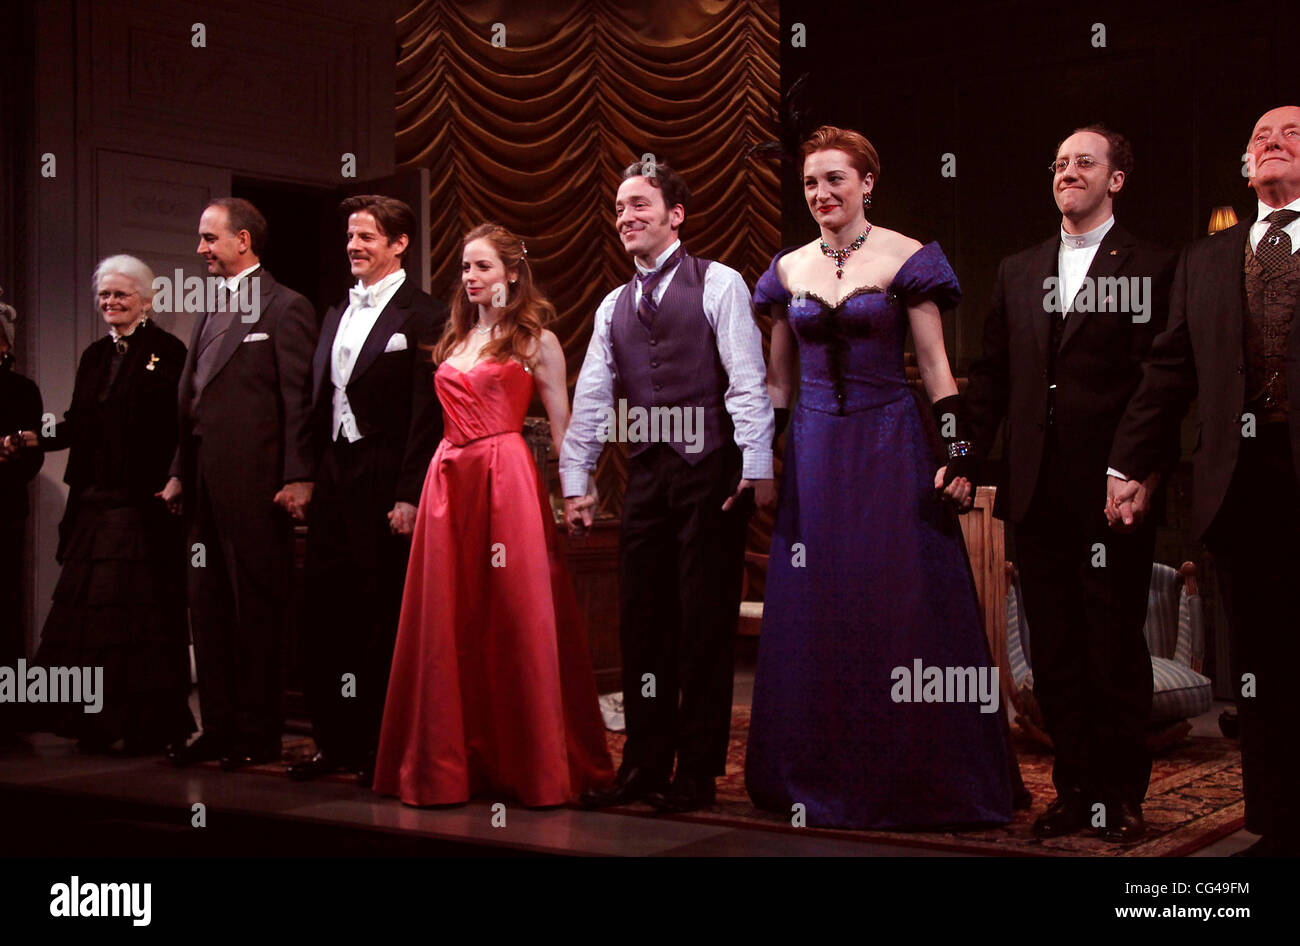 Patricia O'Connell, Michael Countryman, Rick Holmes, Jaime Ray Newman, Jeremy Shamos, Francesca Faridany, Joey Slotnick and Peter Maloney Opening night of the Atlantic Theater production of 'New York Idea' at the Lucille Lortel Theatre - Curtain Call.  Ne Stock Photo